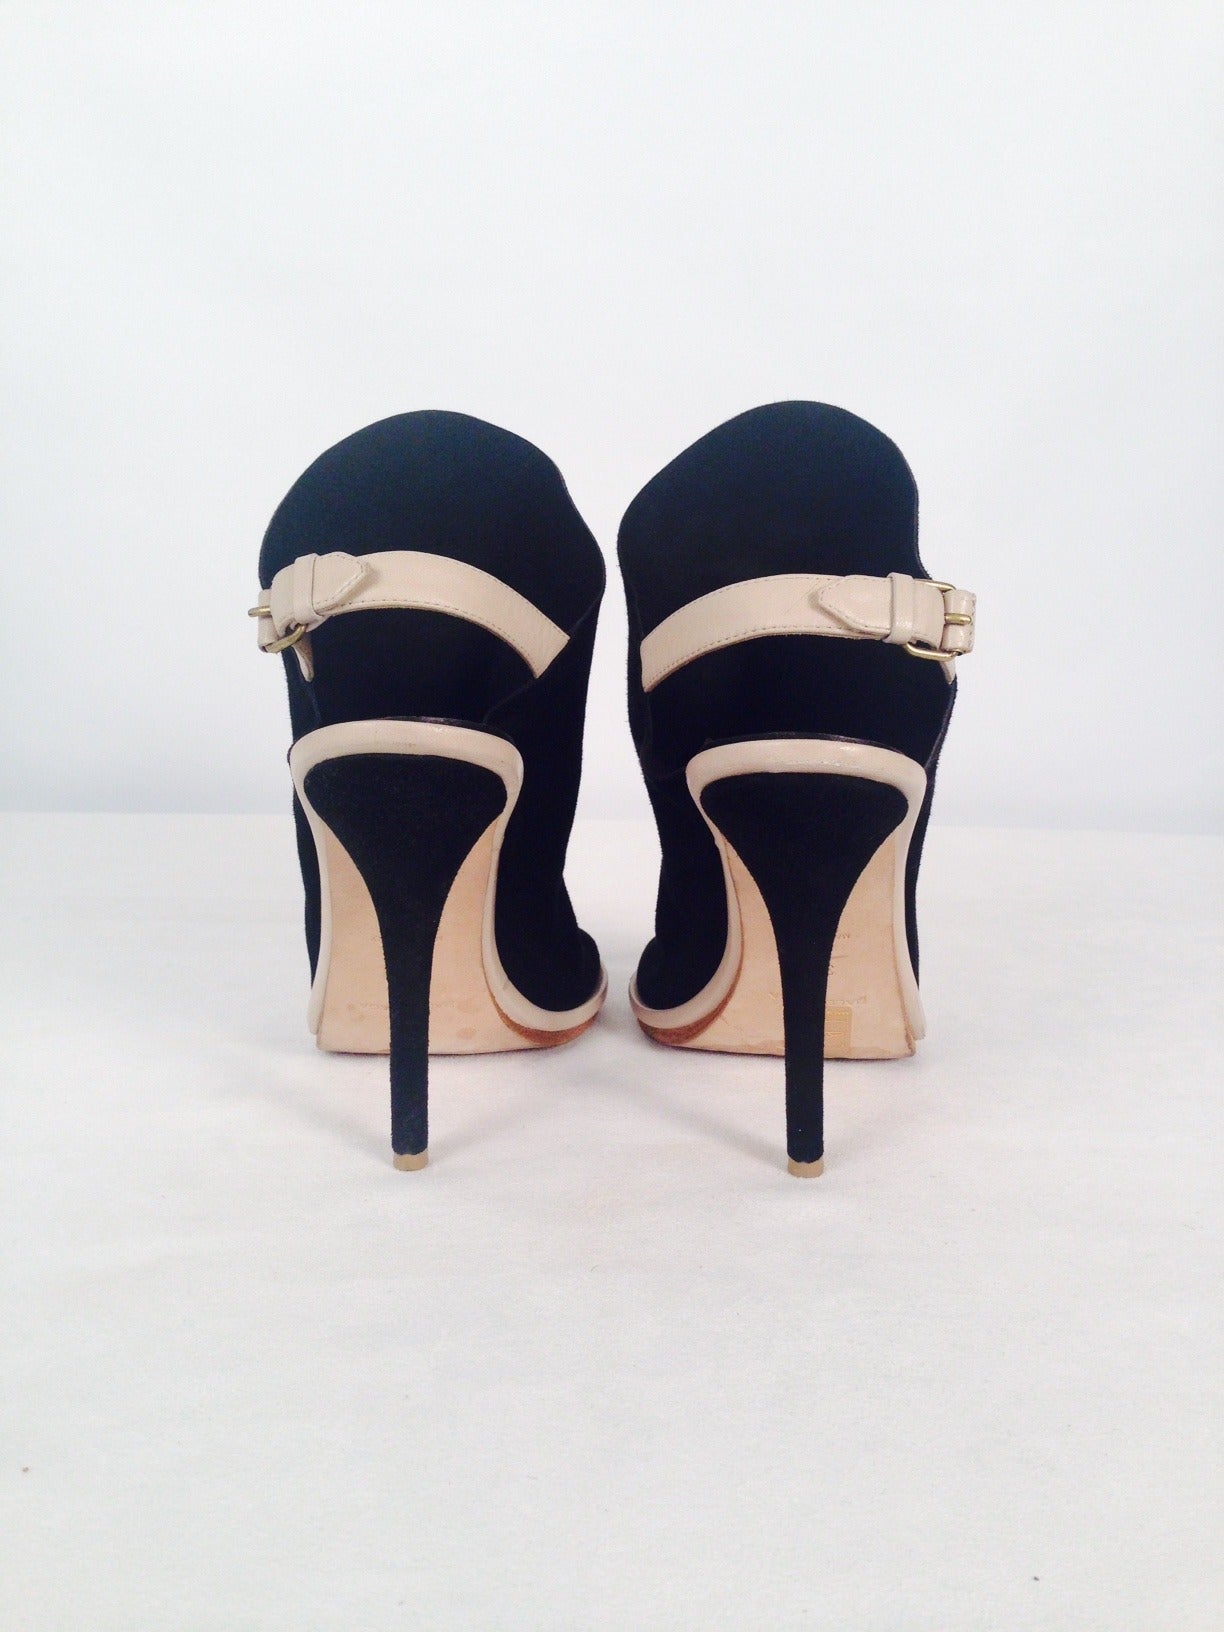 Balenciaga Black Suede Peep Toe Sling Backs In Excellent Condition For Sale In Palm Beach, FL